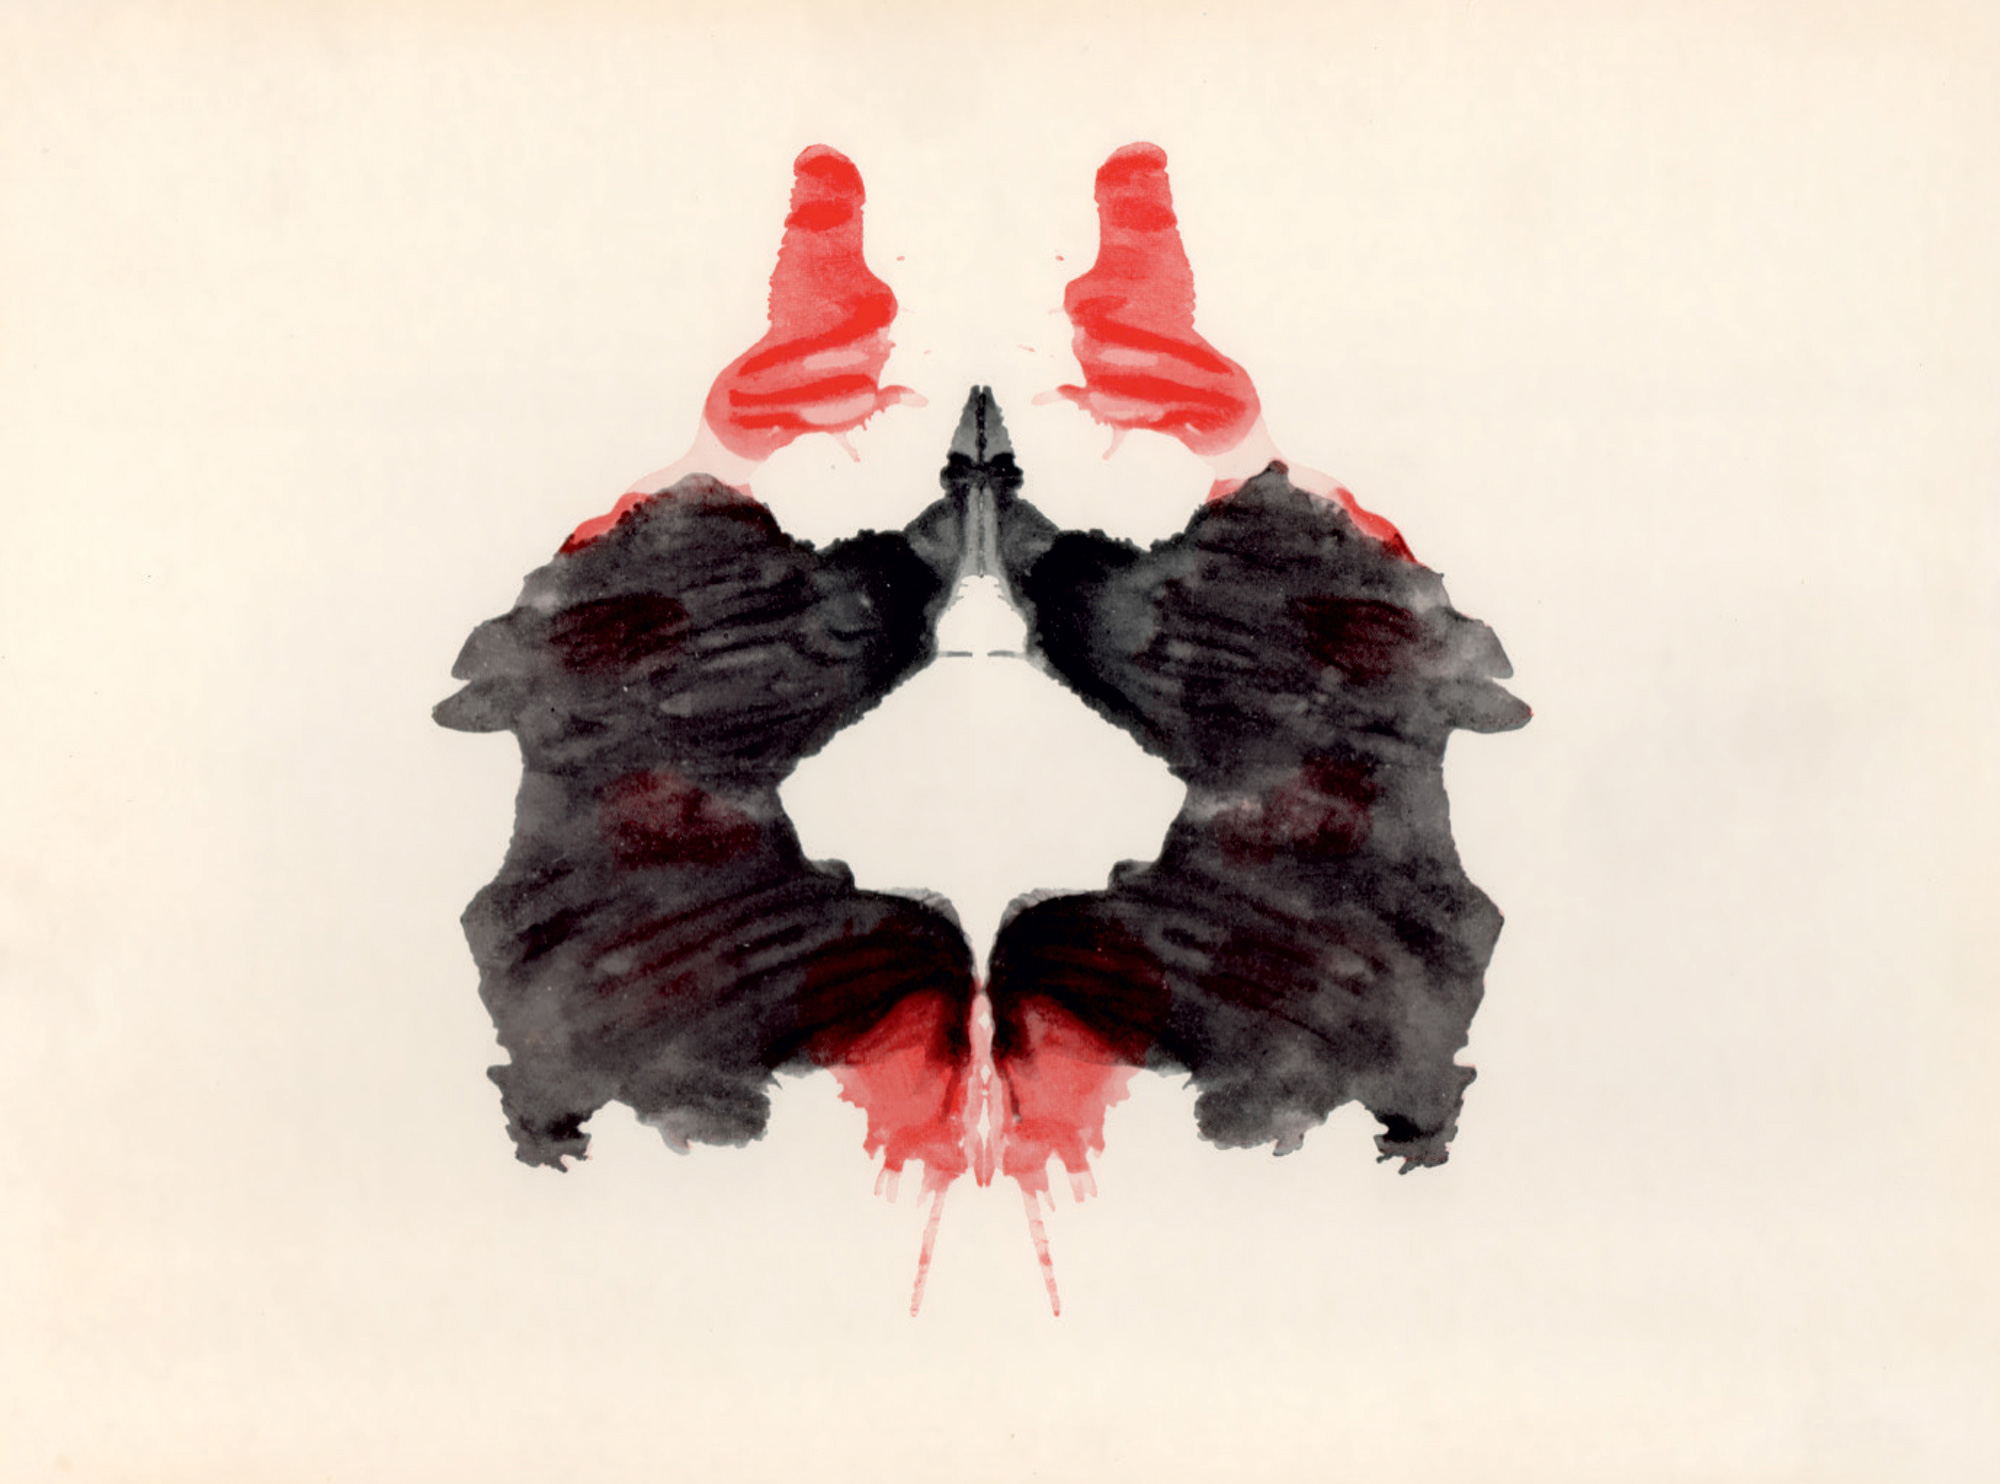 A psychological test titled “Rorschach plate number 2,” featuring an inkblot on paper.